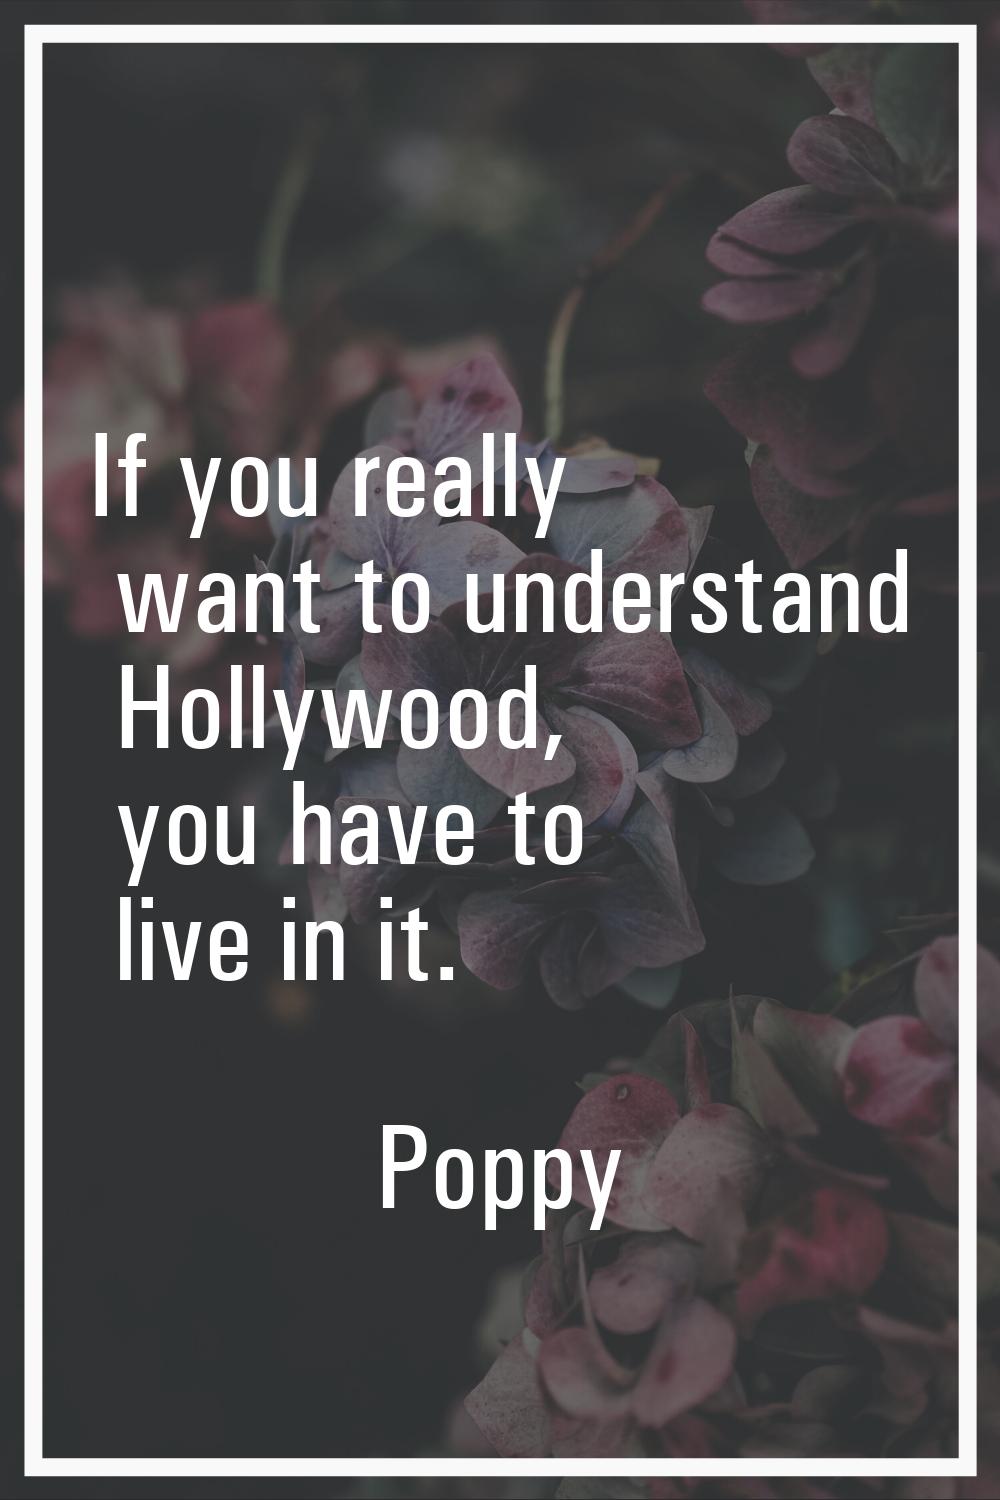 If you really want to understand Hollywood, you have to live in it.